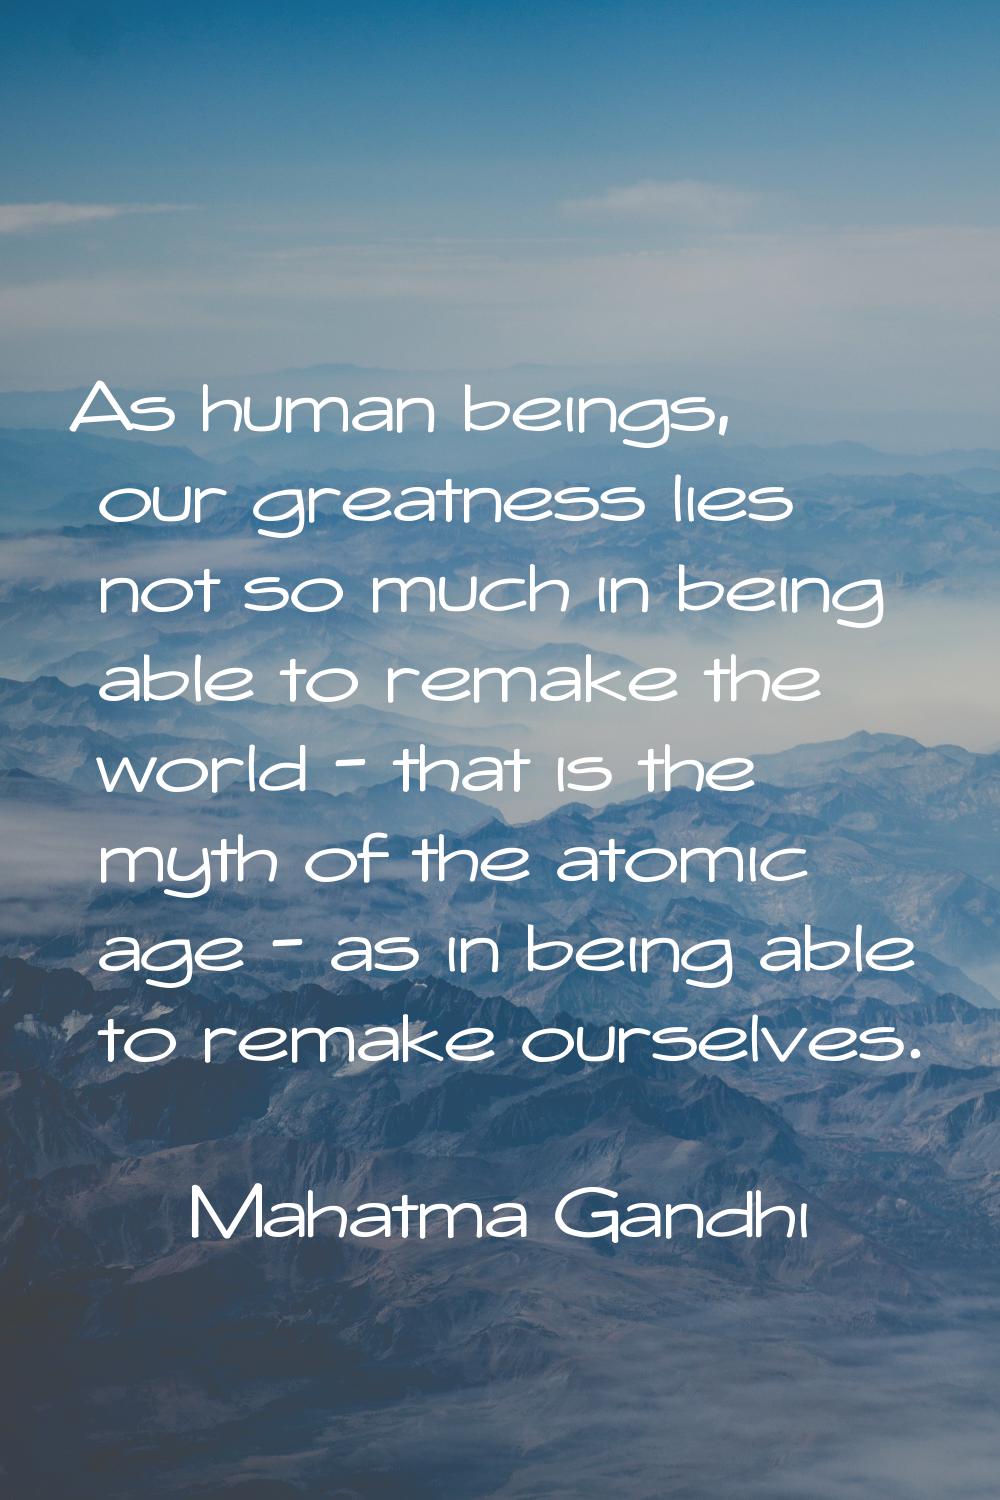 As human beings, our greatness lies not so much in being able to remake the world - that is the myt